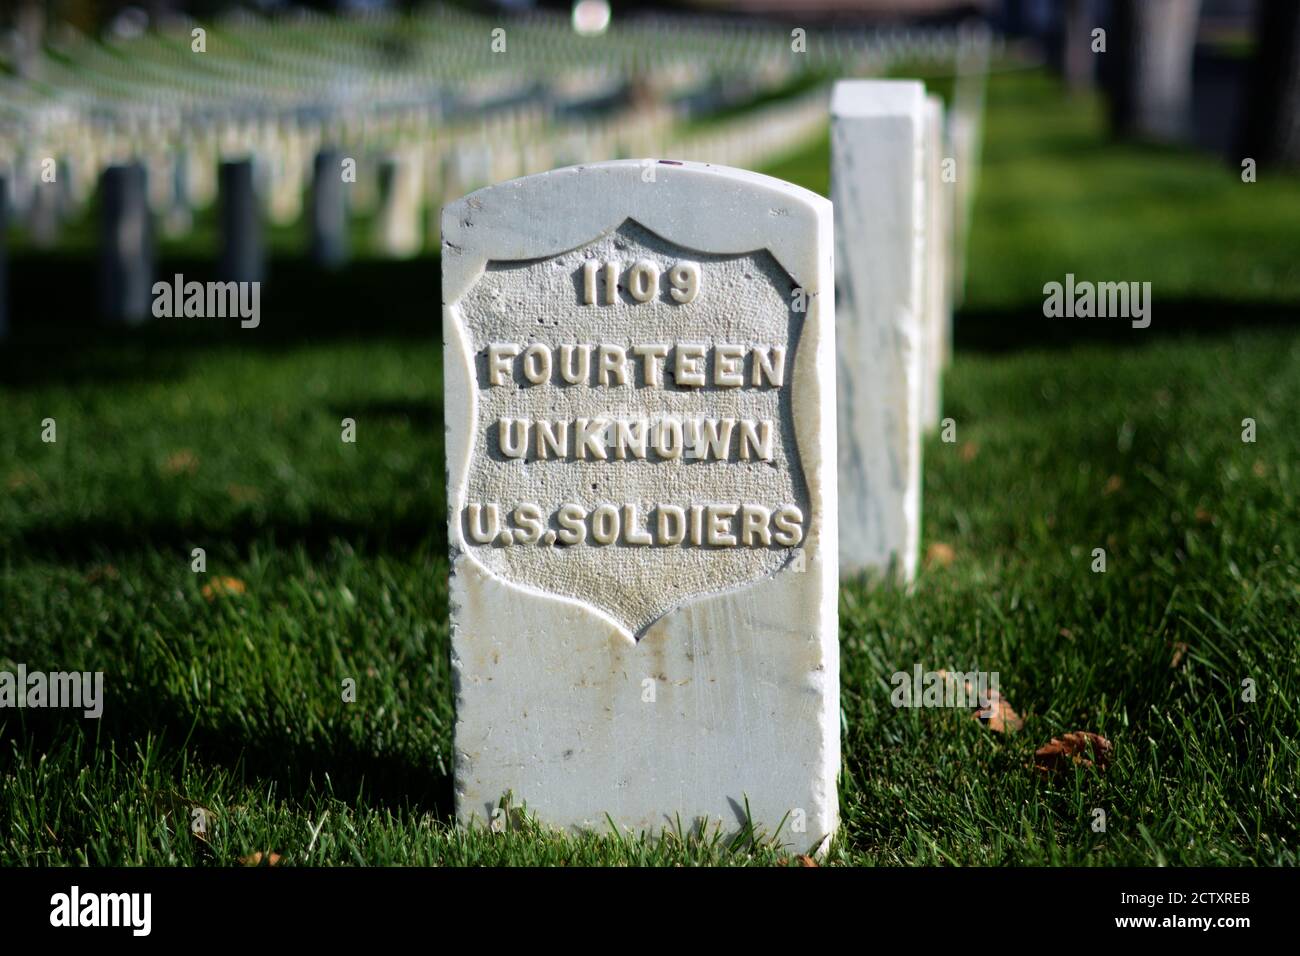 A tombstone marks the mass grave of 14 unknown U.S. soldiers who died in American's Civil War in the 1860s. Stock Photo